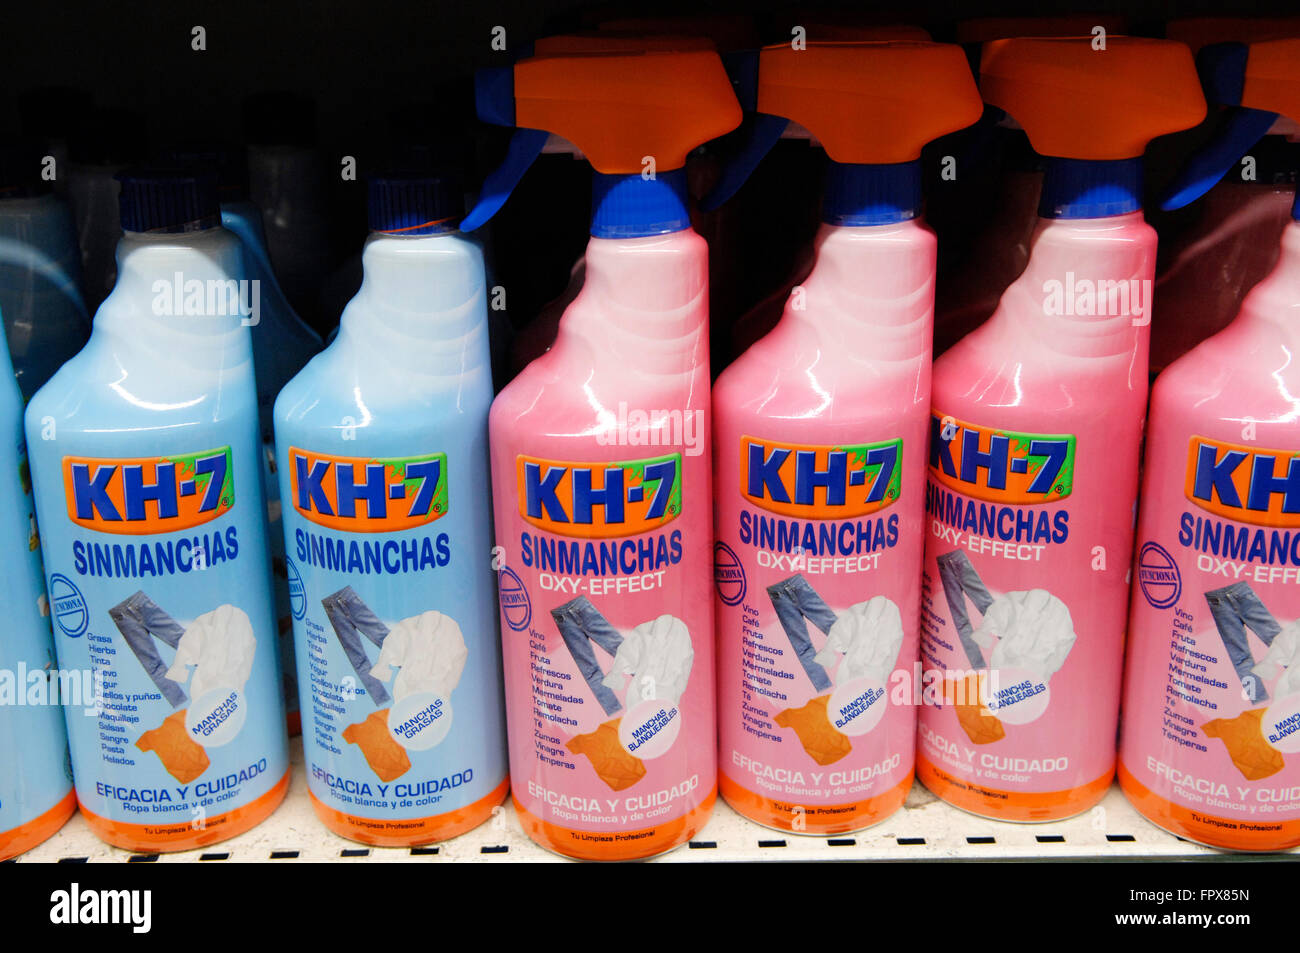 https://c8.alamy.com/comp/FPX85N/kh-7-sinmanchas-stain-remover-on-display-in-a-carrefour-supermarket-FPX85N.jpg